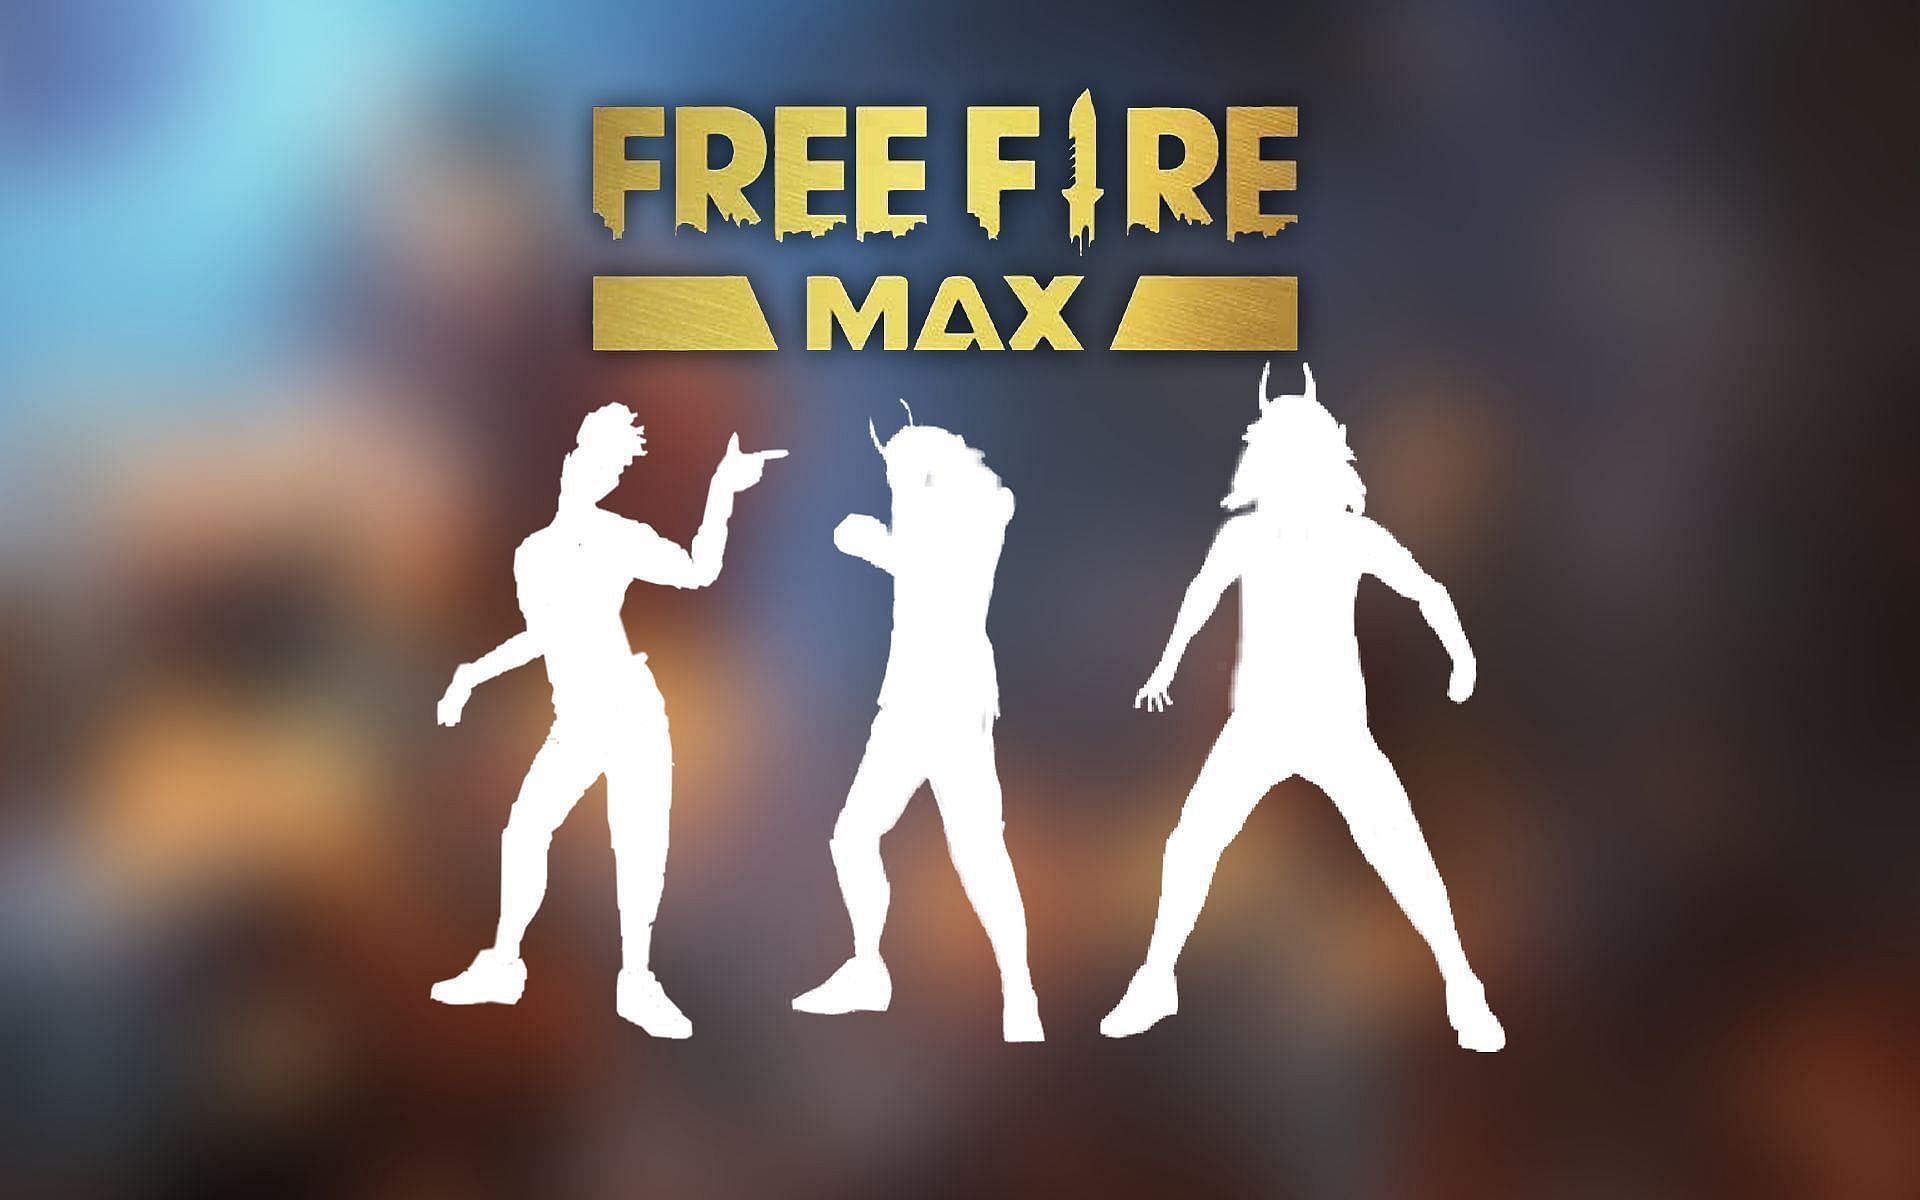 Emotes are an essential part of the Free Fire MAX experience (Image via Sportskeeda)